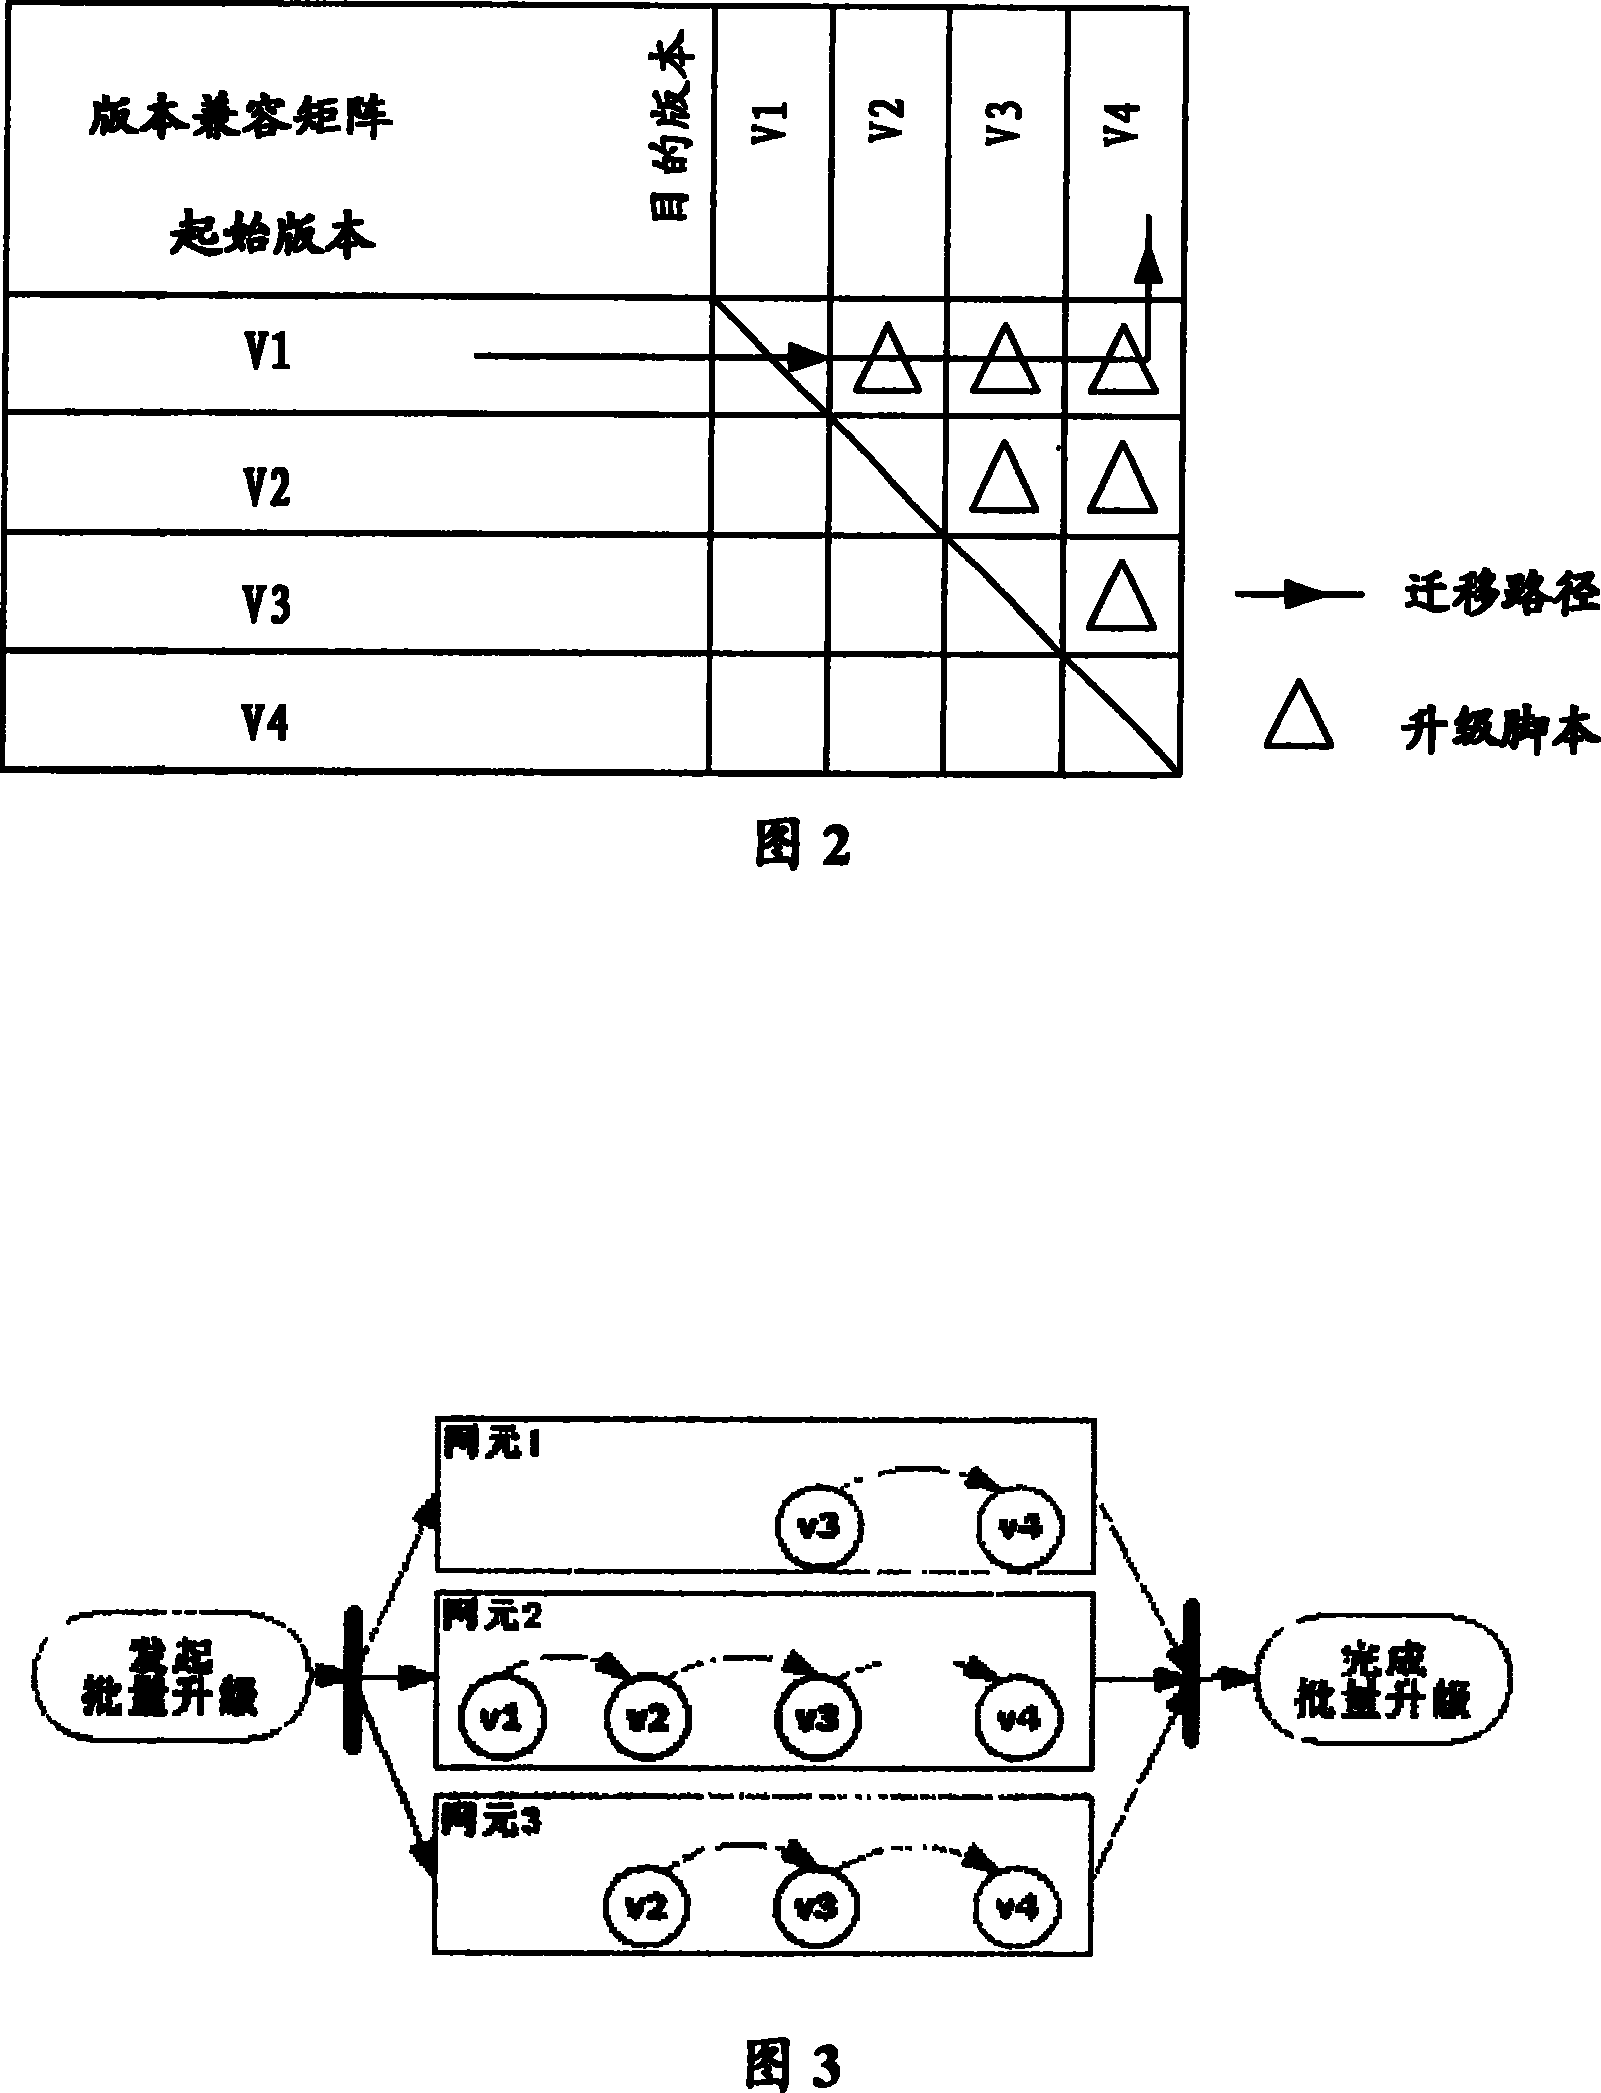 Method and apparatus for batch upgrading multi-element configuration data